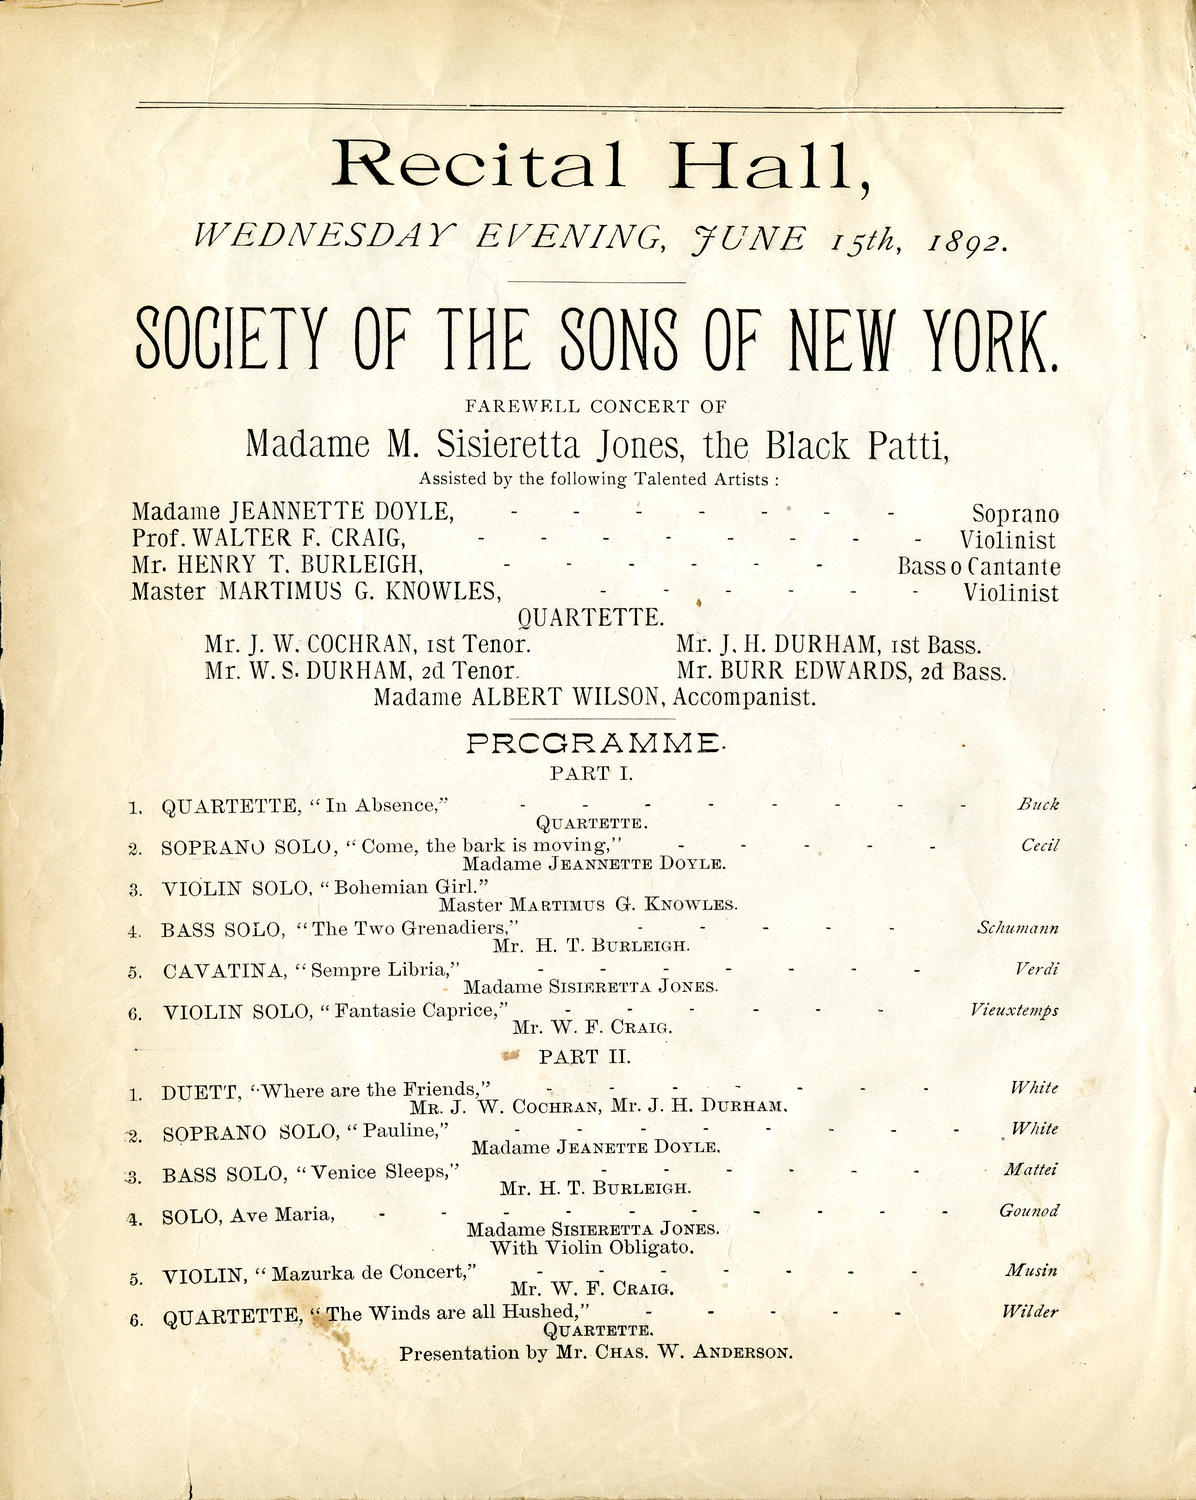 Society of the Sons of New York: Farewell Concert of Sisieretta Jones, the Black Patti, June 15, 1892, program page 1